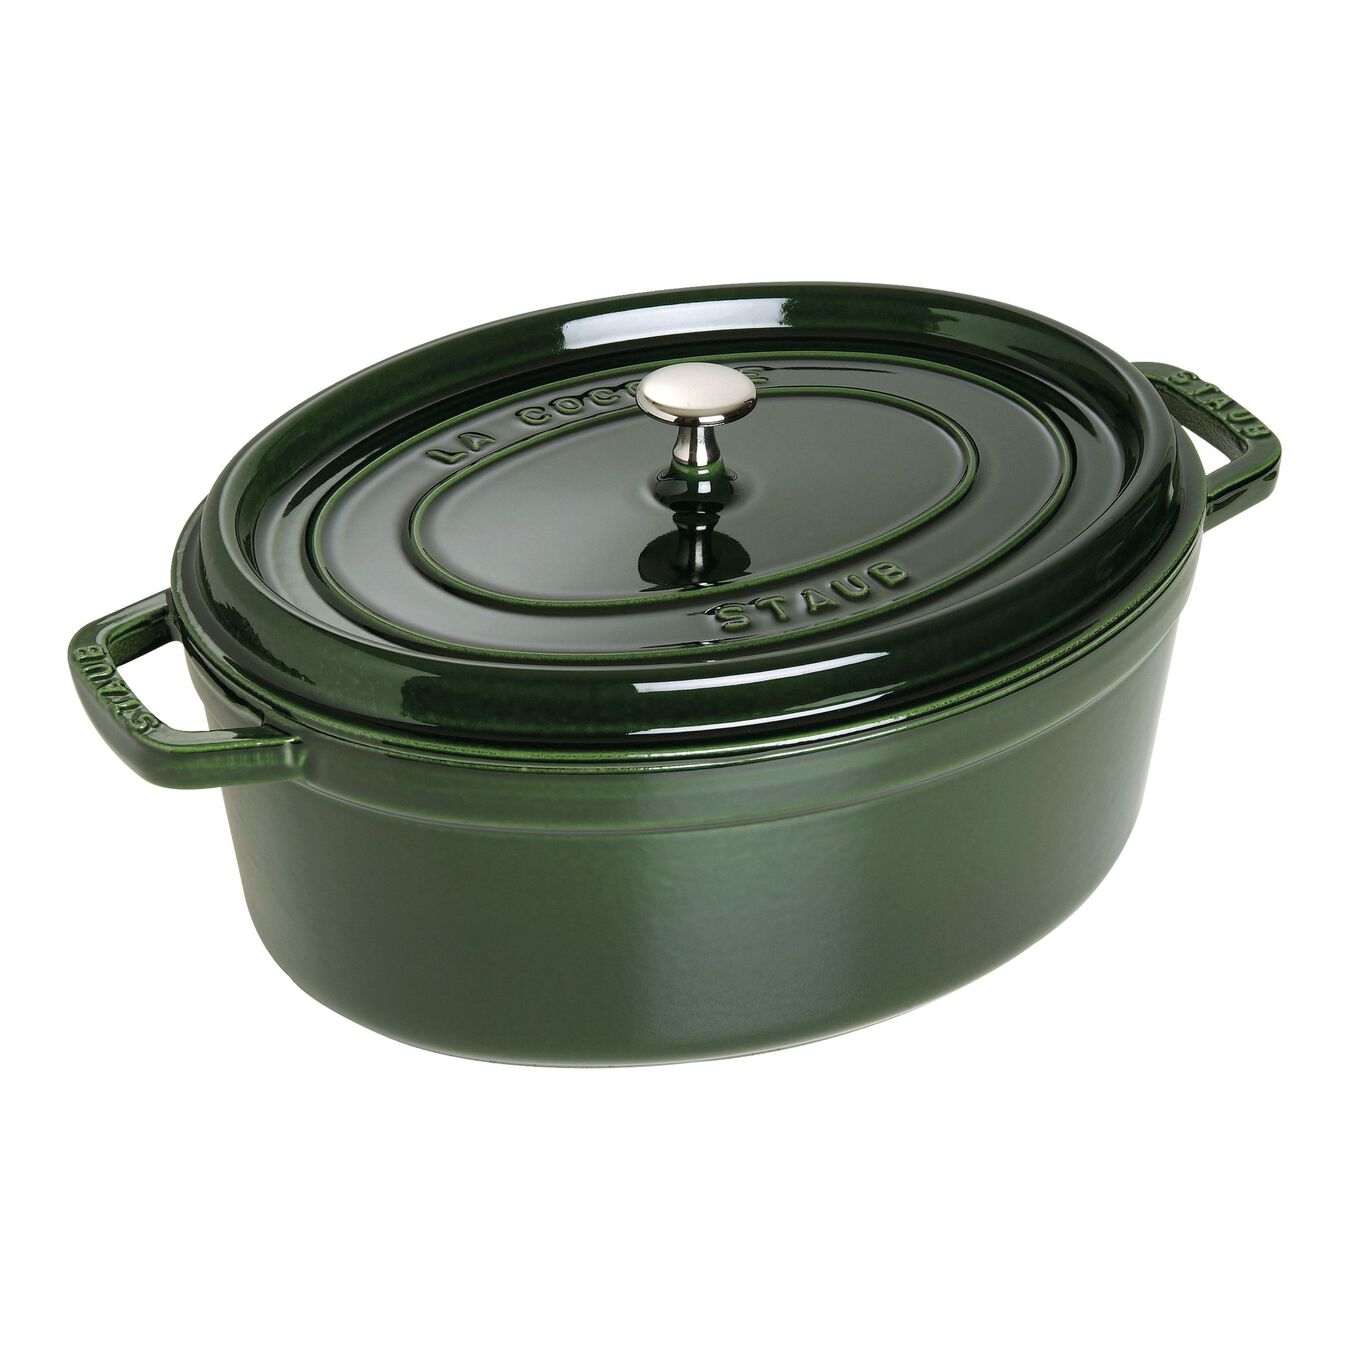 31 cm oval Cast iron Cocotte basil-green,,large 1